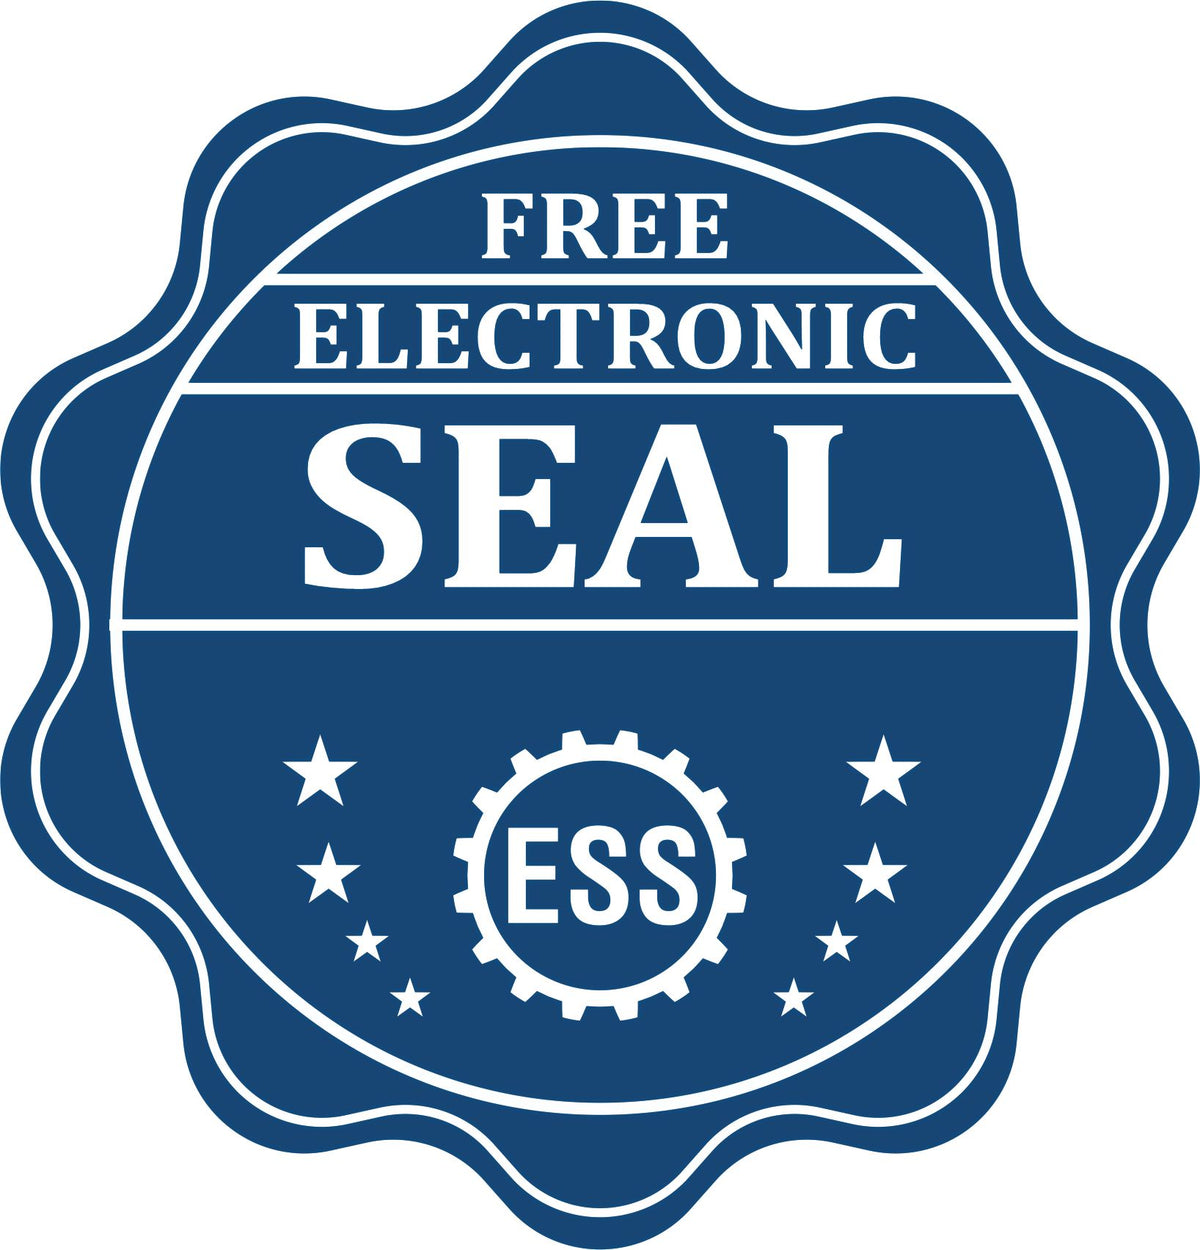 A badge showing a free electronic seal for the Gift Vermont Architect Seal with stars and the ESS gear on the emblem.